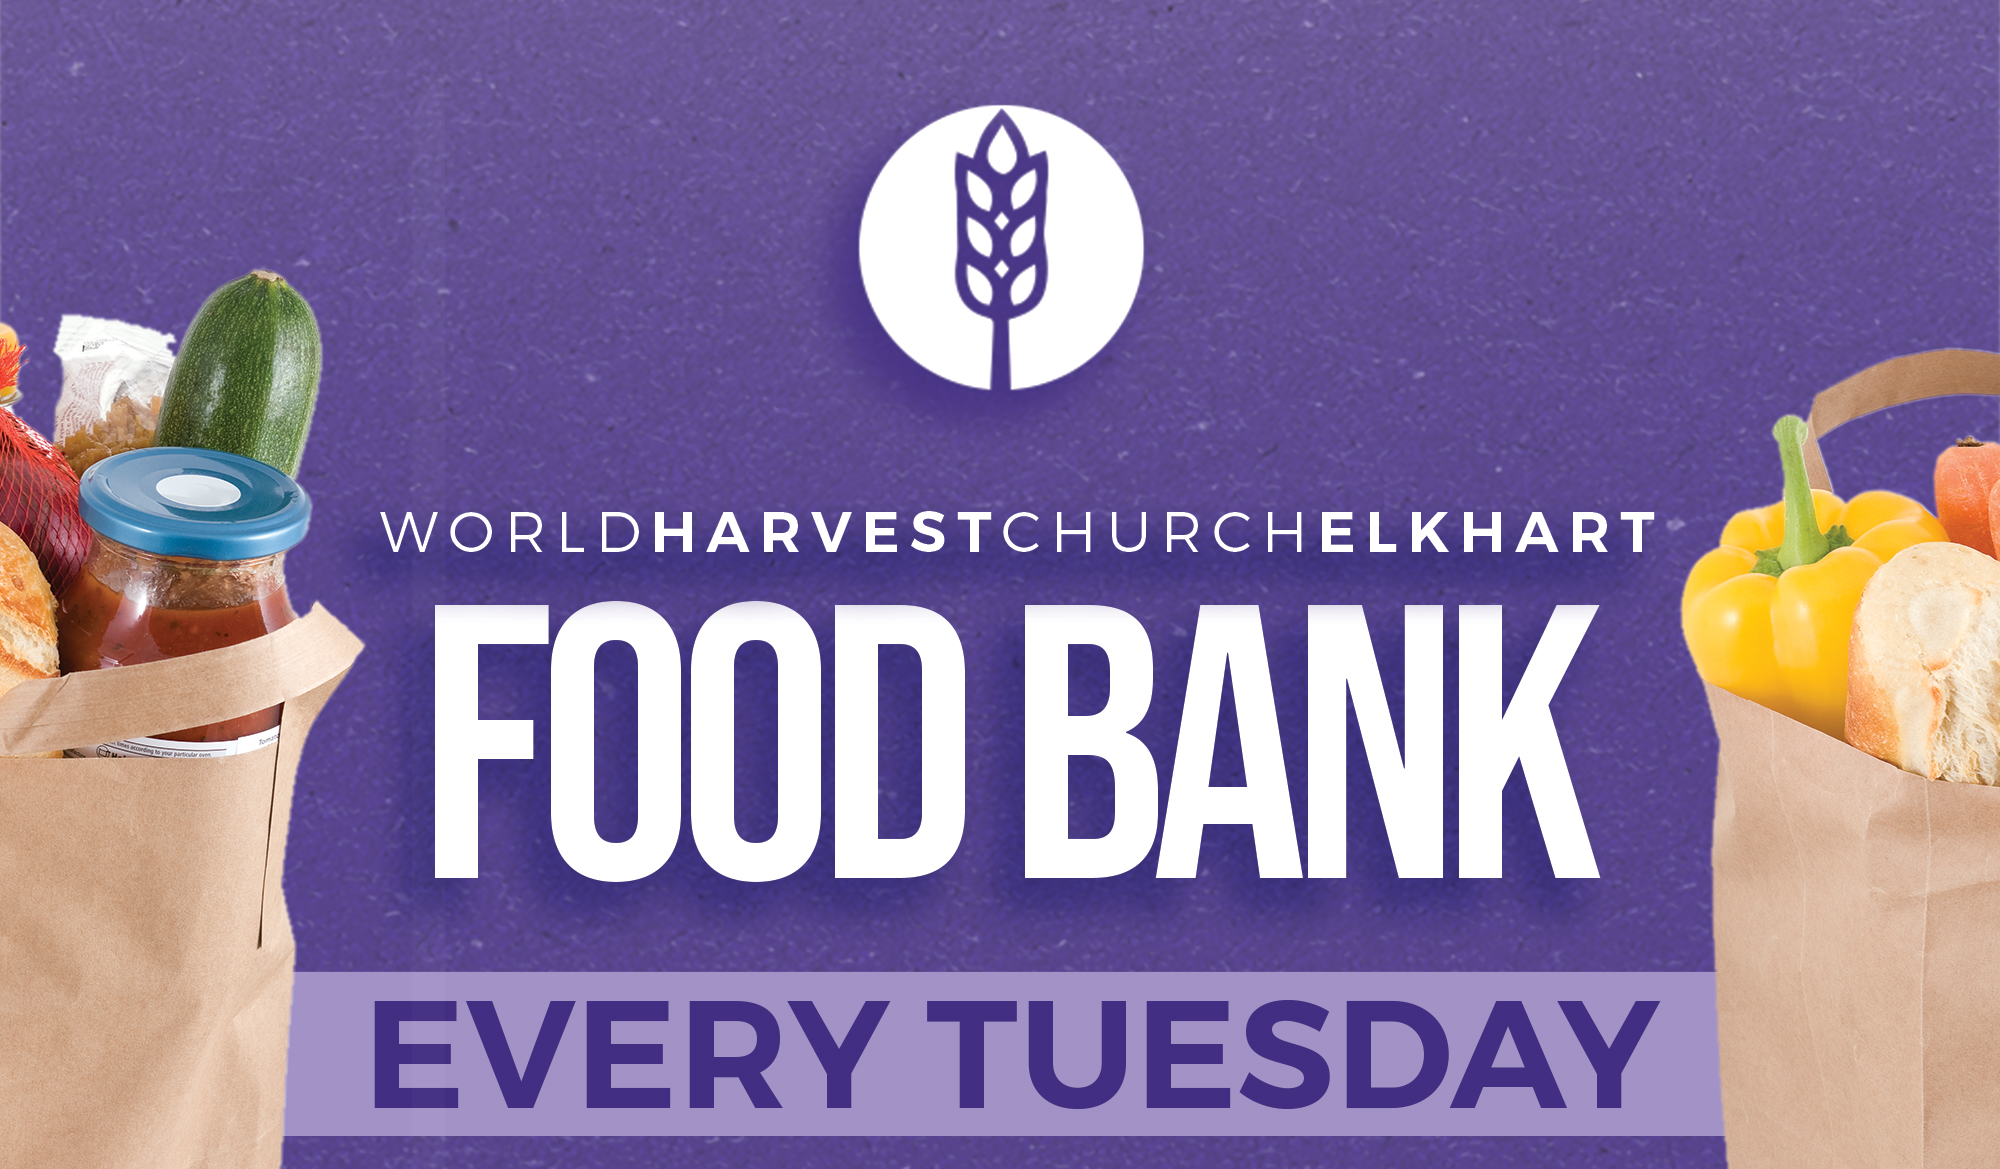 Grand Opening Tuesday October 5th World Harvest Church Elkhart Food Bank